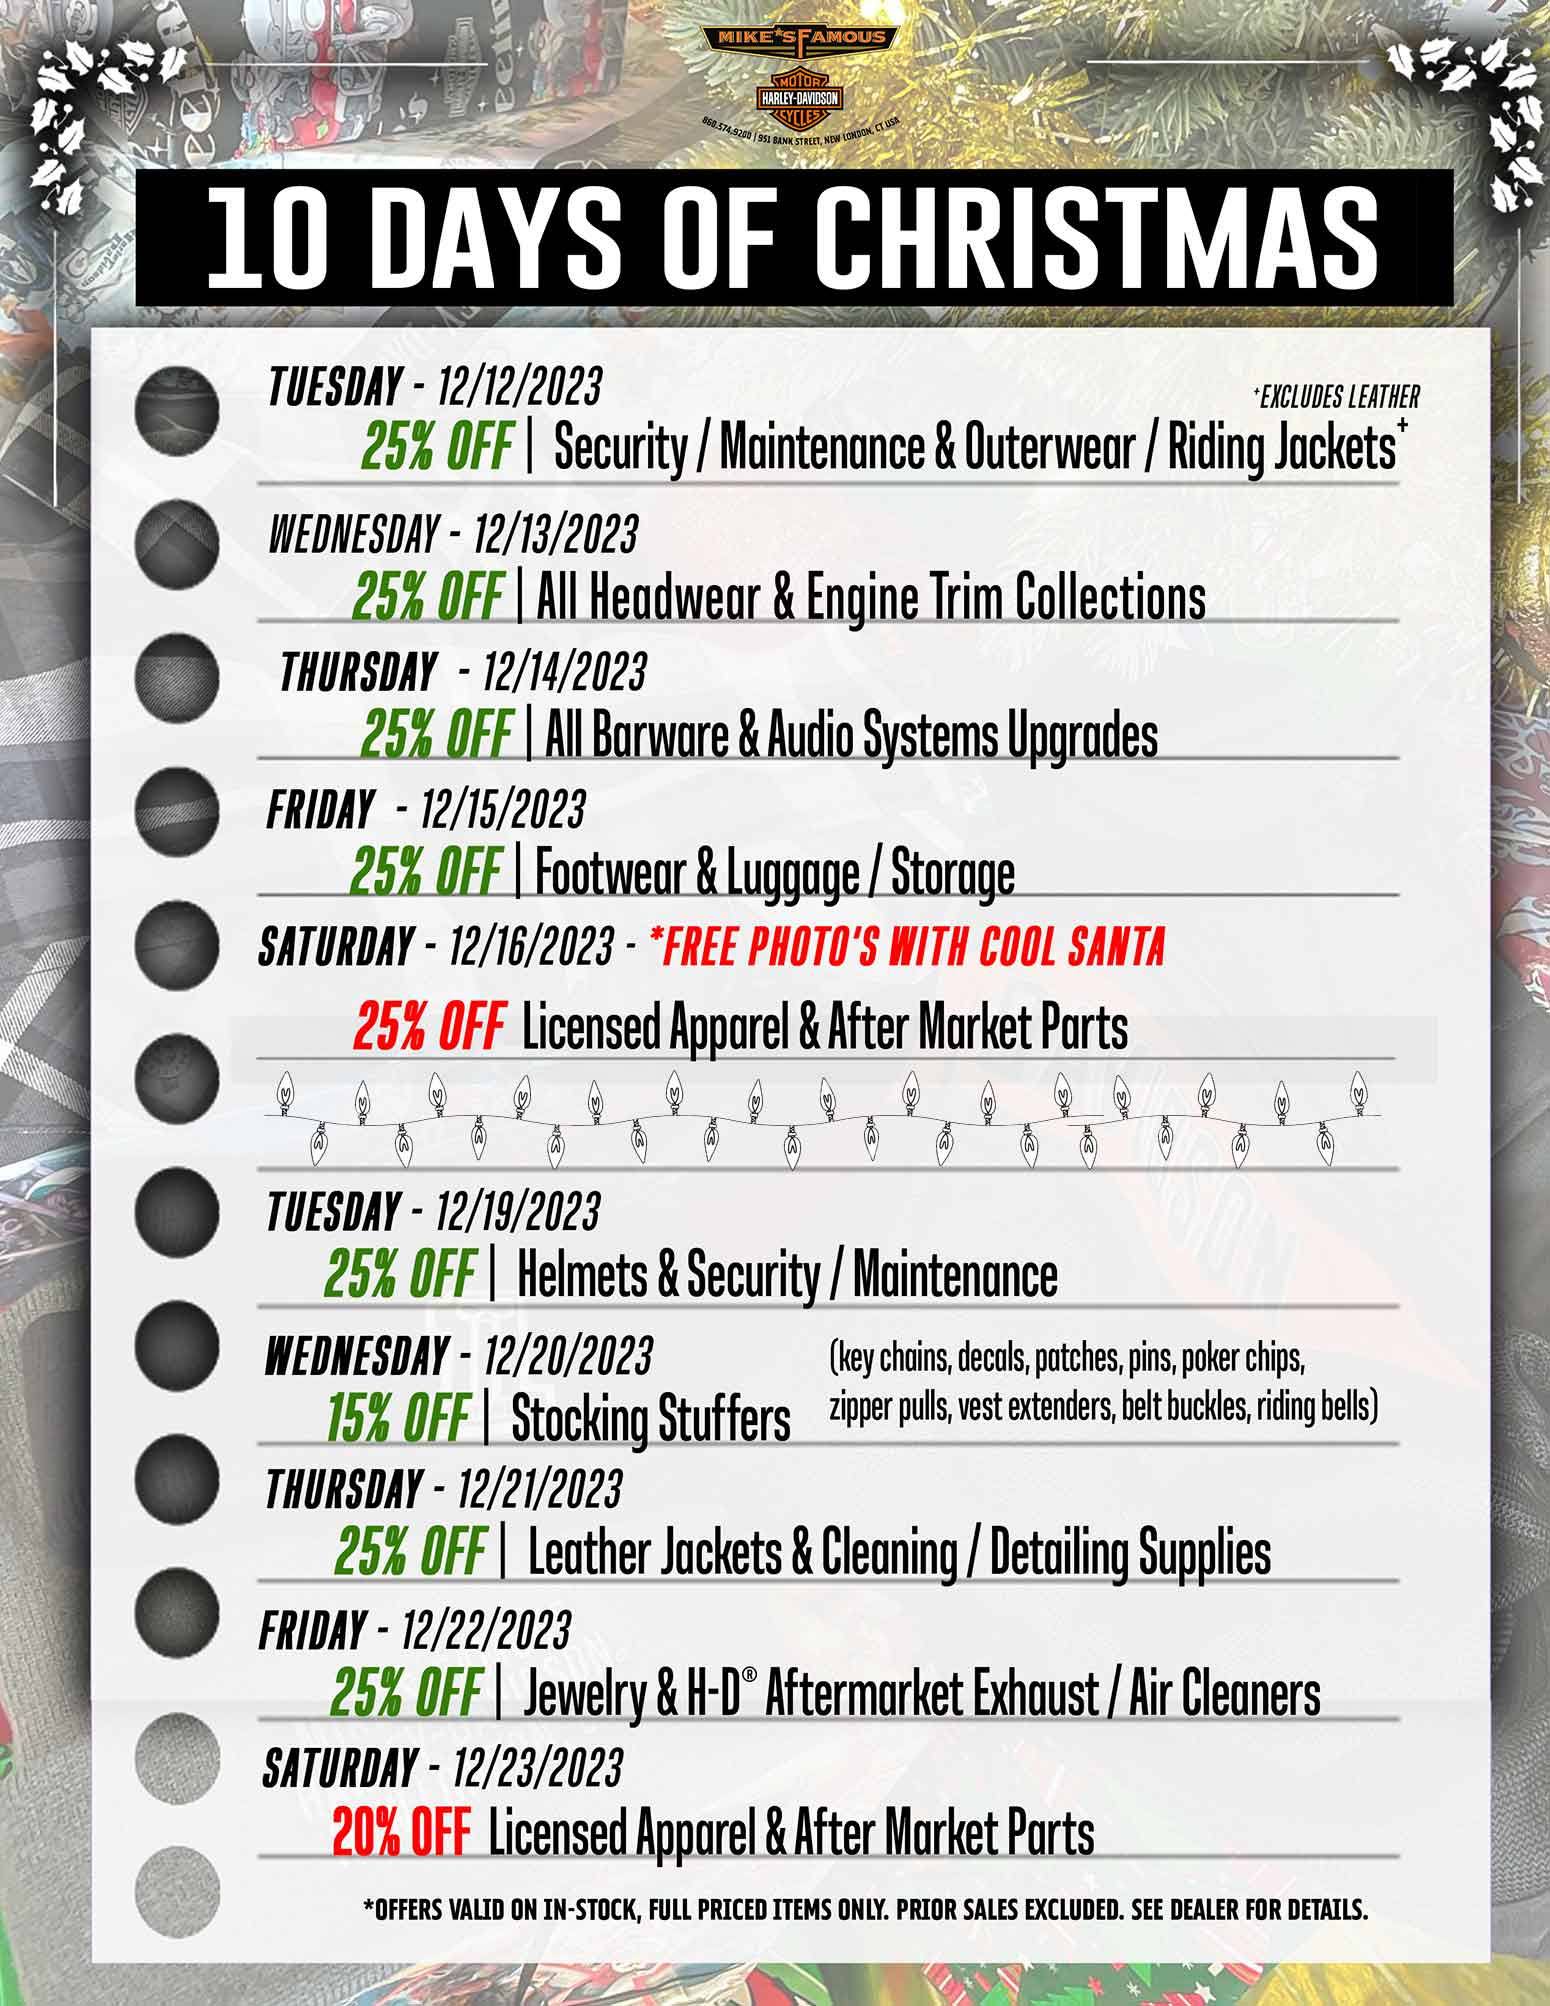 10 Days of Christmas at Mike's Famous Harley-Davidson